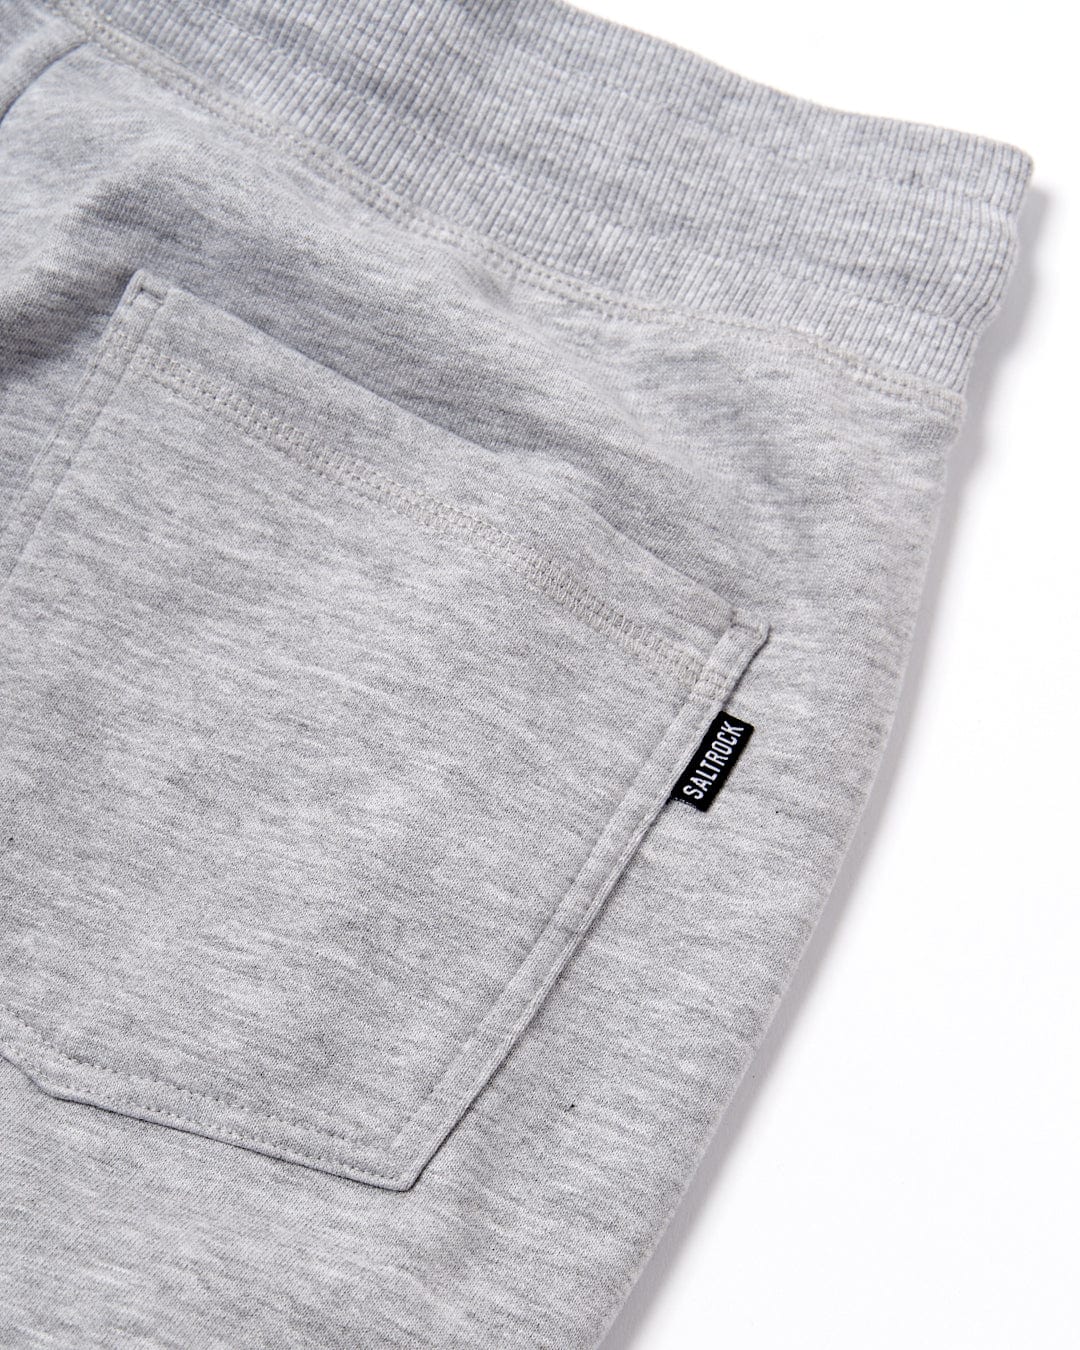 Close-up of a grey Velator womens joggers fabric texture with a pocket and Saltrock branding.